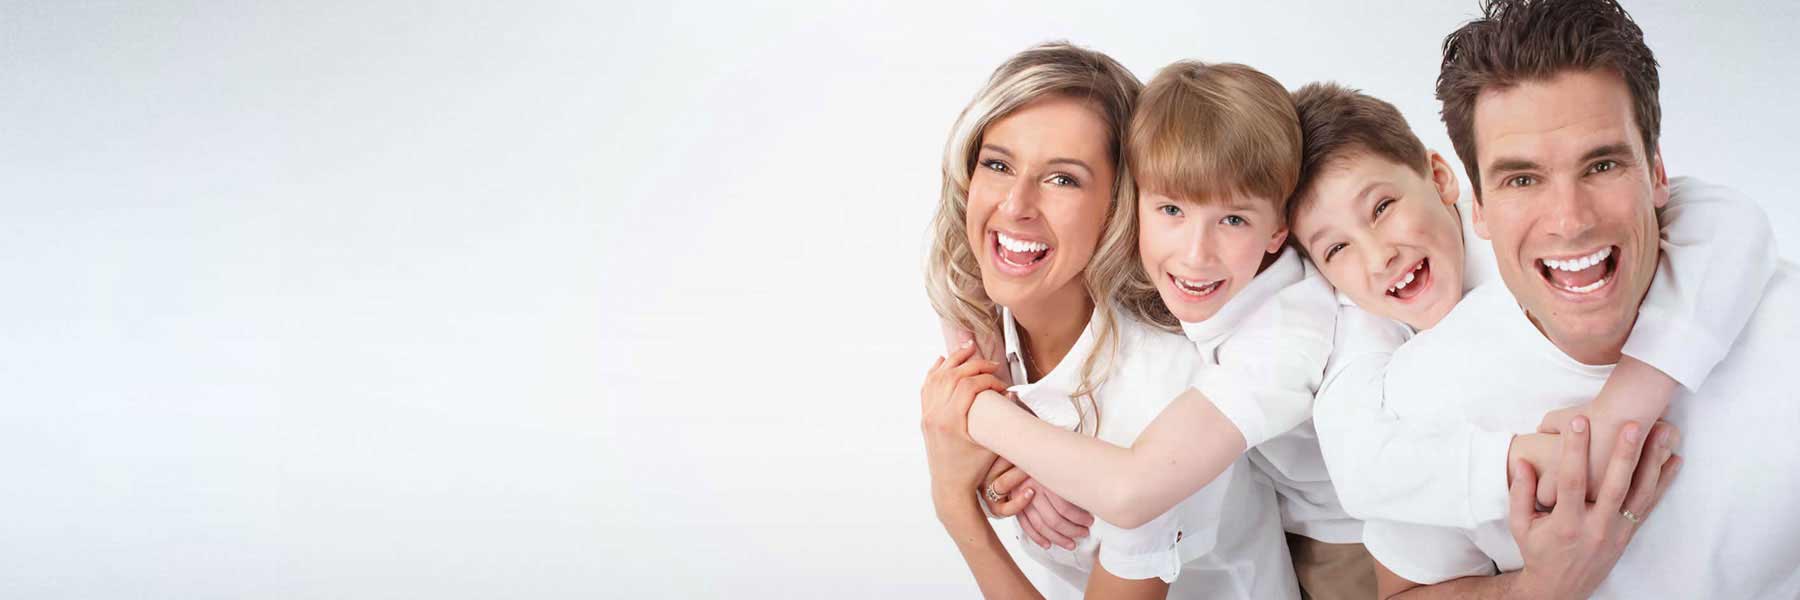 General Dentistry Service in South Maitland - Tooth N Care